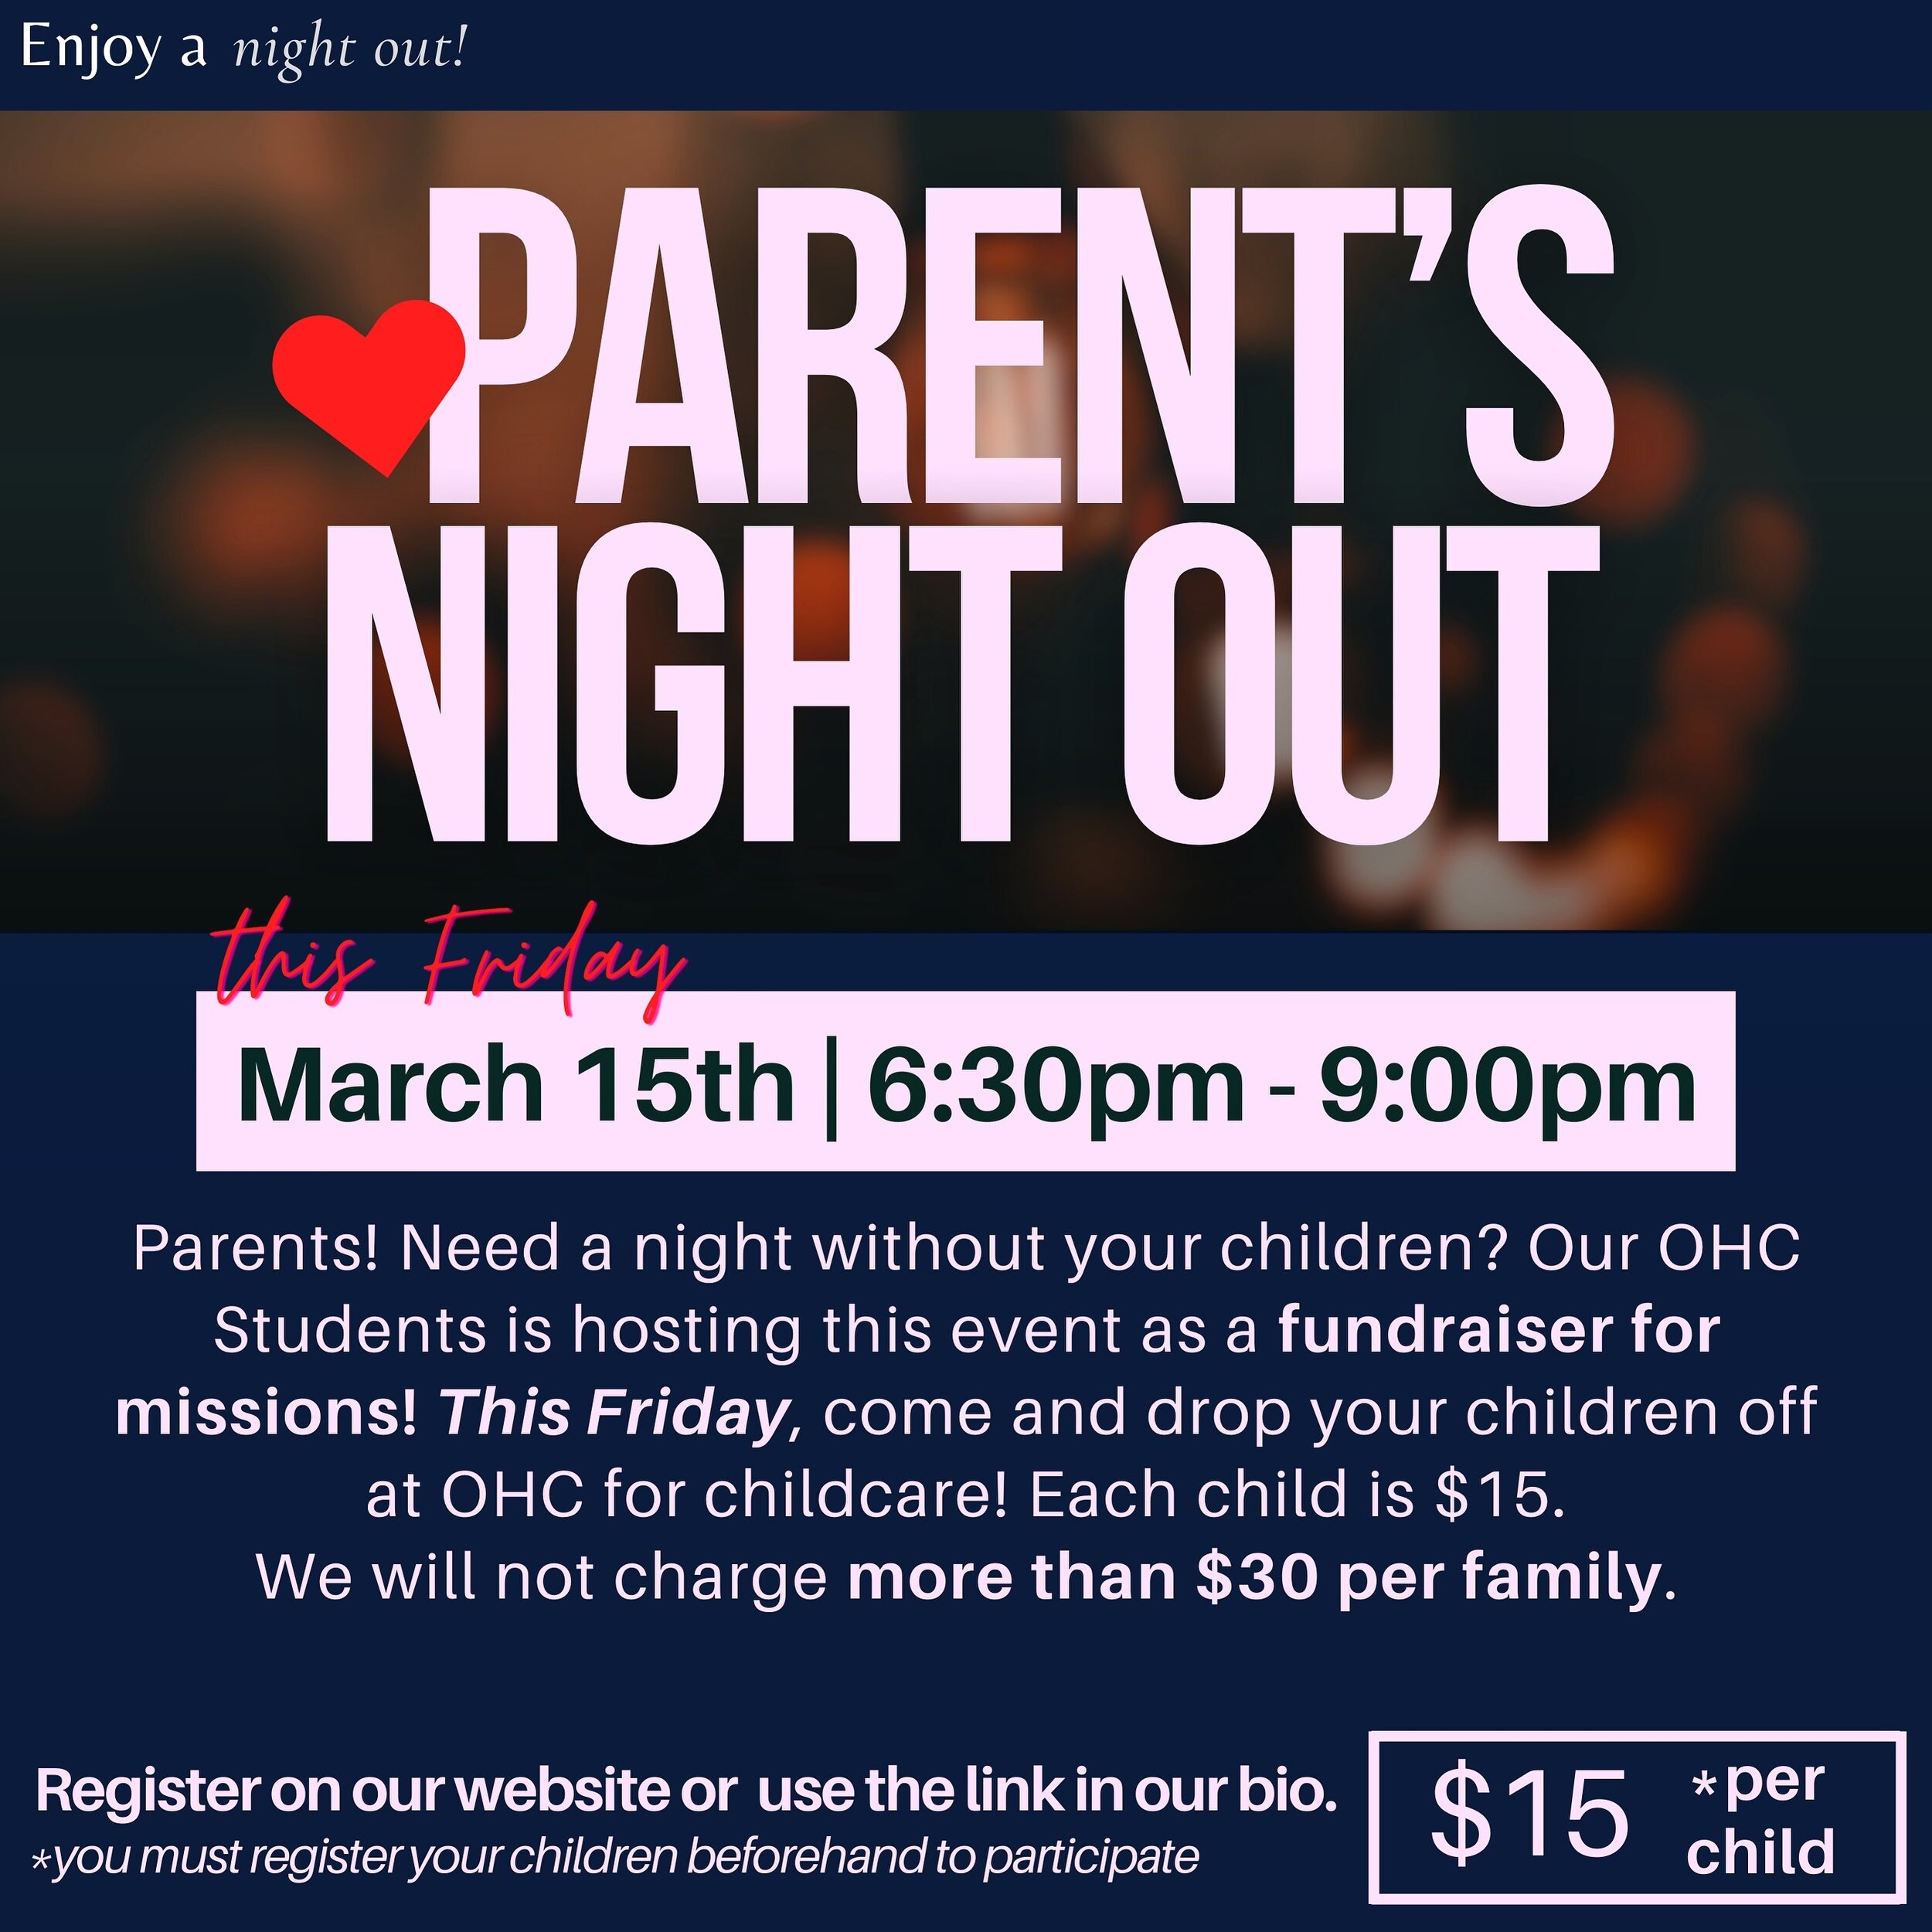 Our OHC Students are hosting PARENTS NIGHT OUT as a fundraiser for missions! Help support the cause and register your children beforehand by clicking the link in our bio or going to our website. 

It&rsquo;s not too late to register your children tod